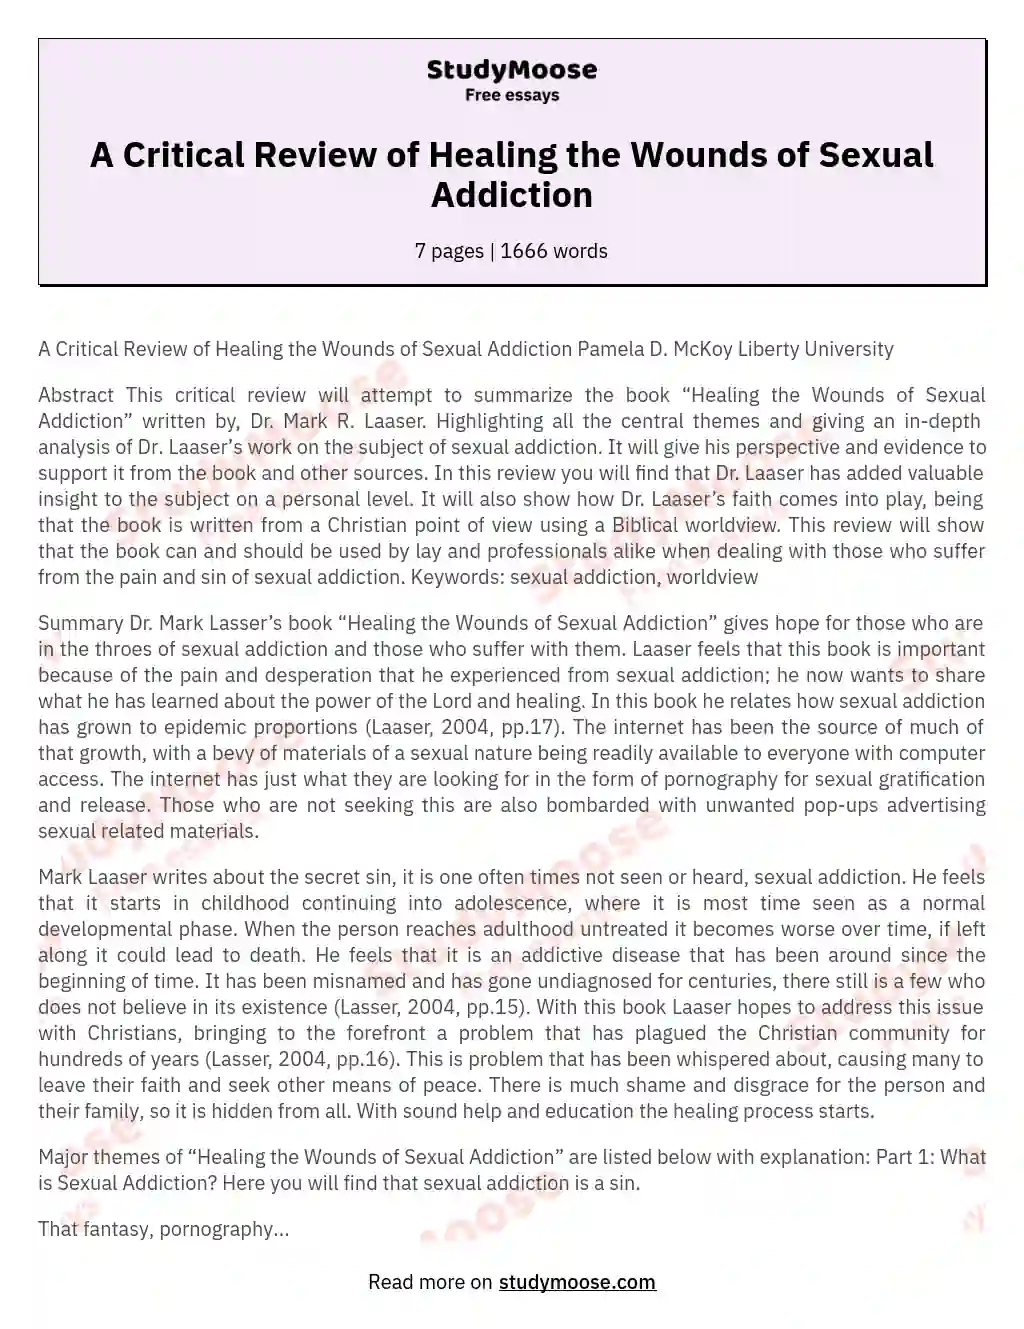 A Critical Review of Healing the Wounds of Sexual Addiction essay